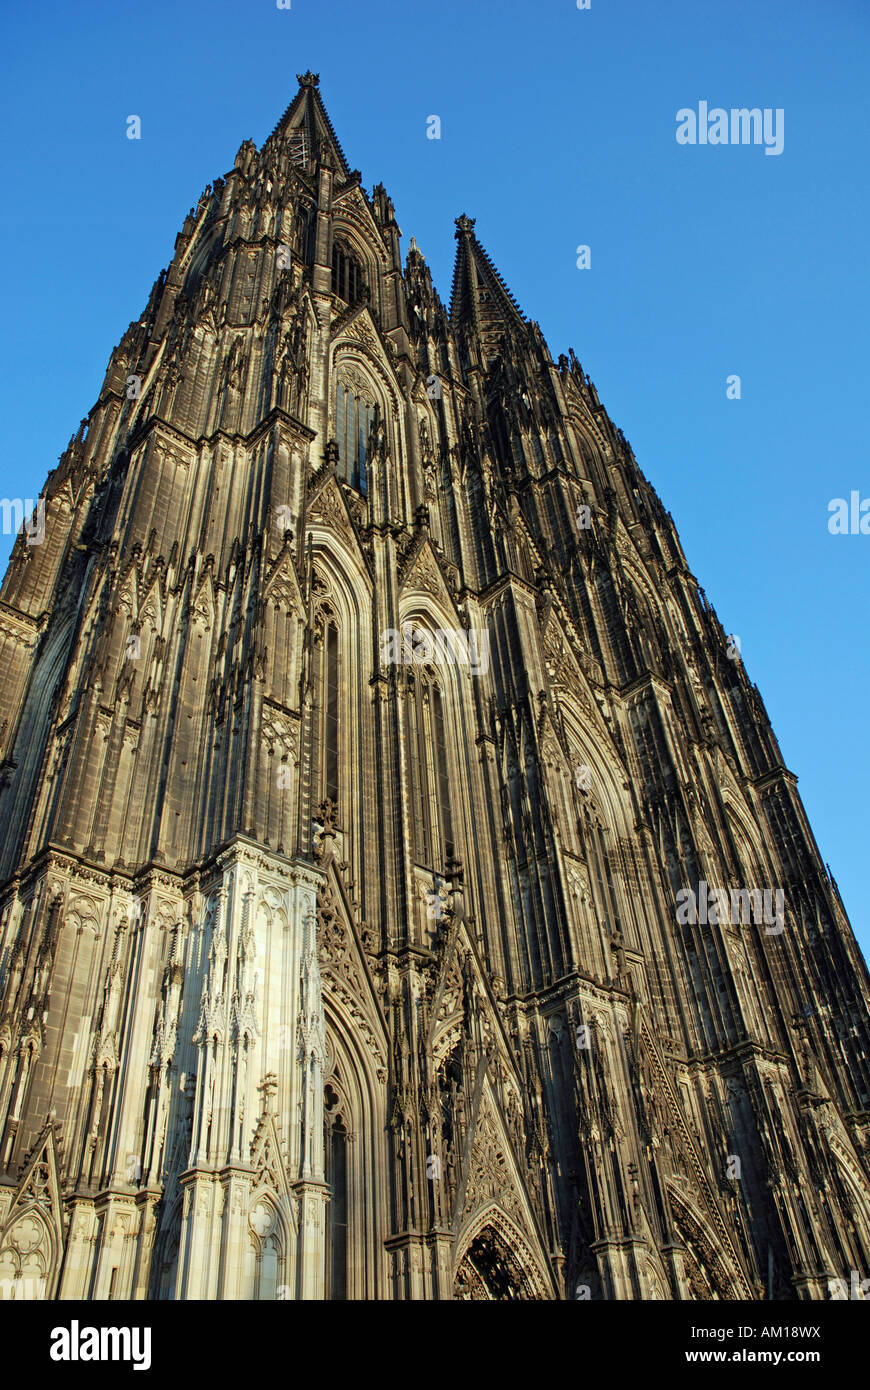 Cologne Cathedrale, Cologne, North Rhine-Westphalia, Germany Stock Photo